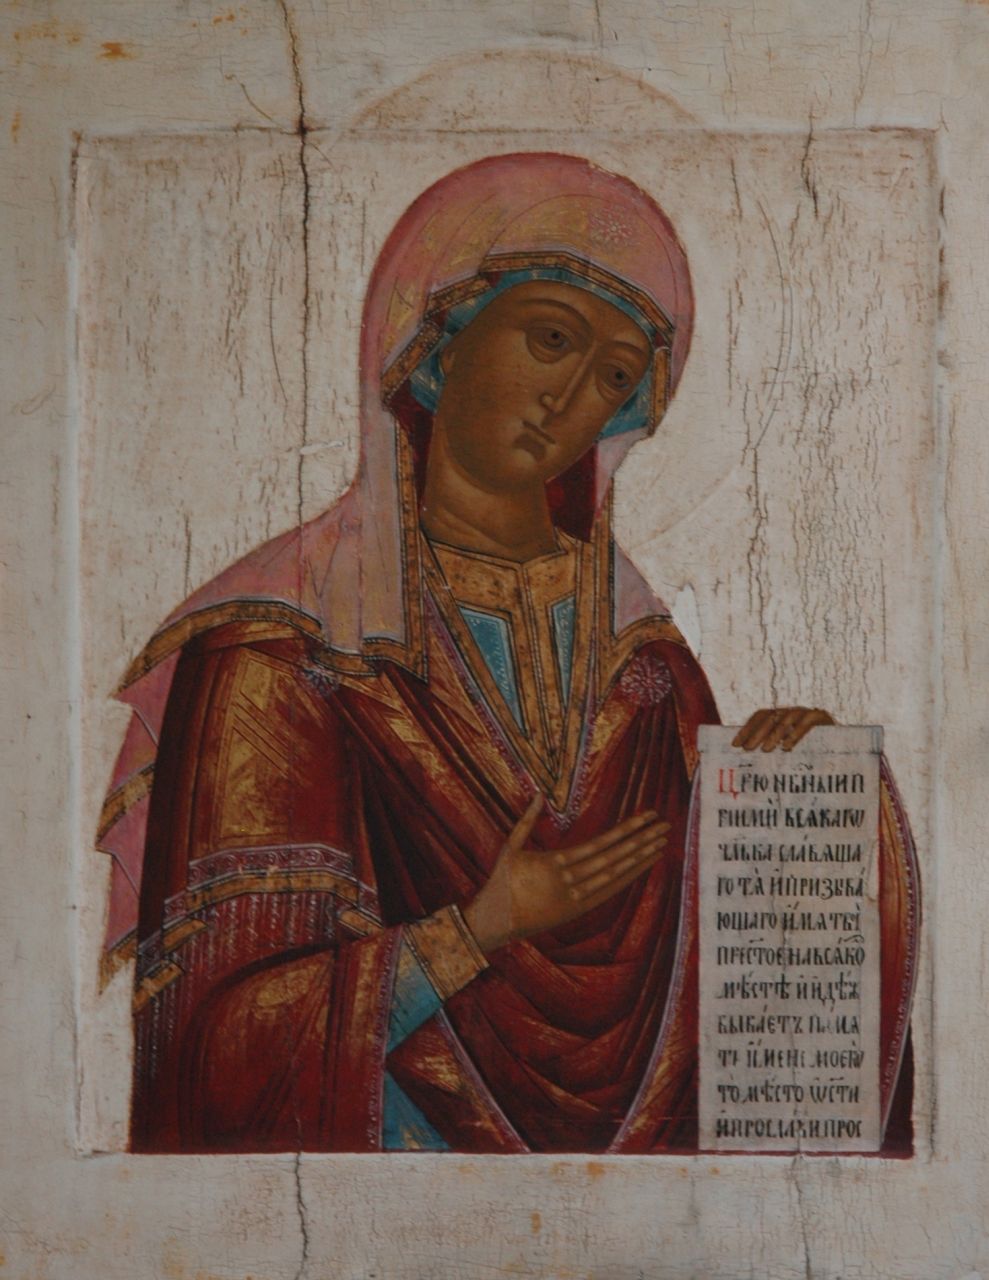 Ikoon   | Ikoon | Paintings offered for sale | Mother of God, tempera on panel 44.7 x 37.2 cm, painted ca. 1800